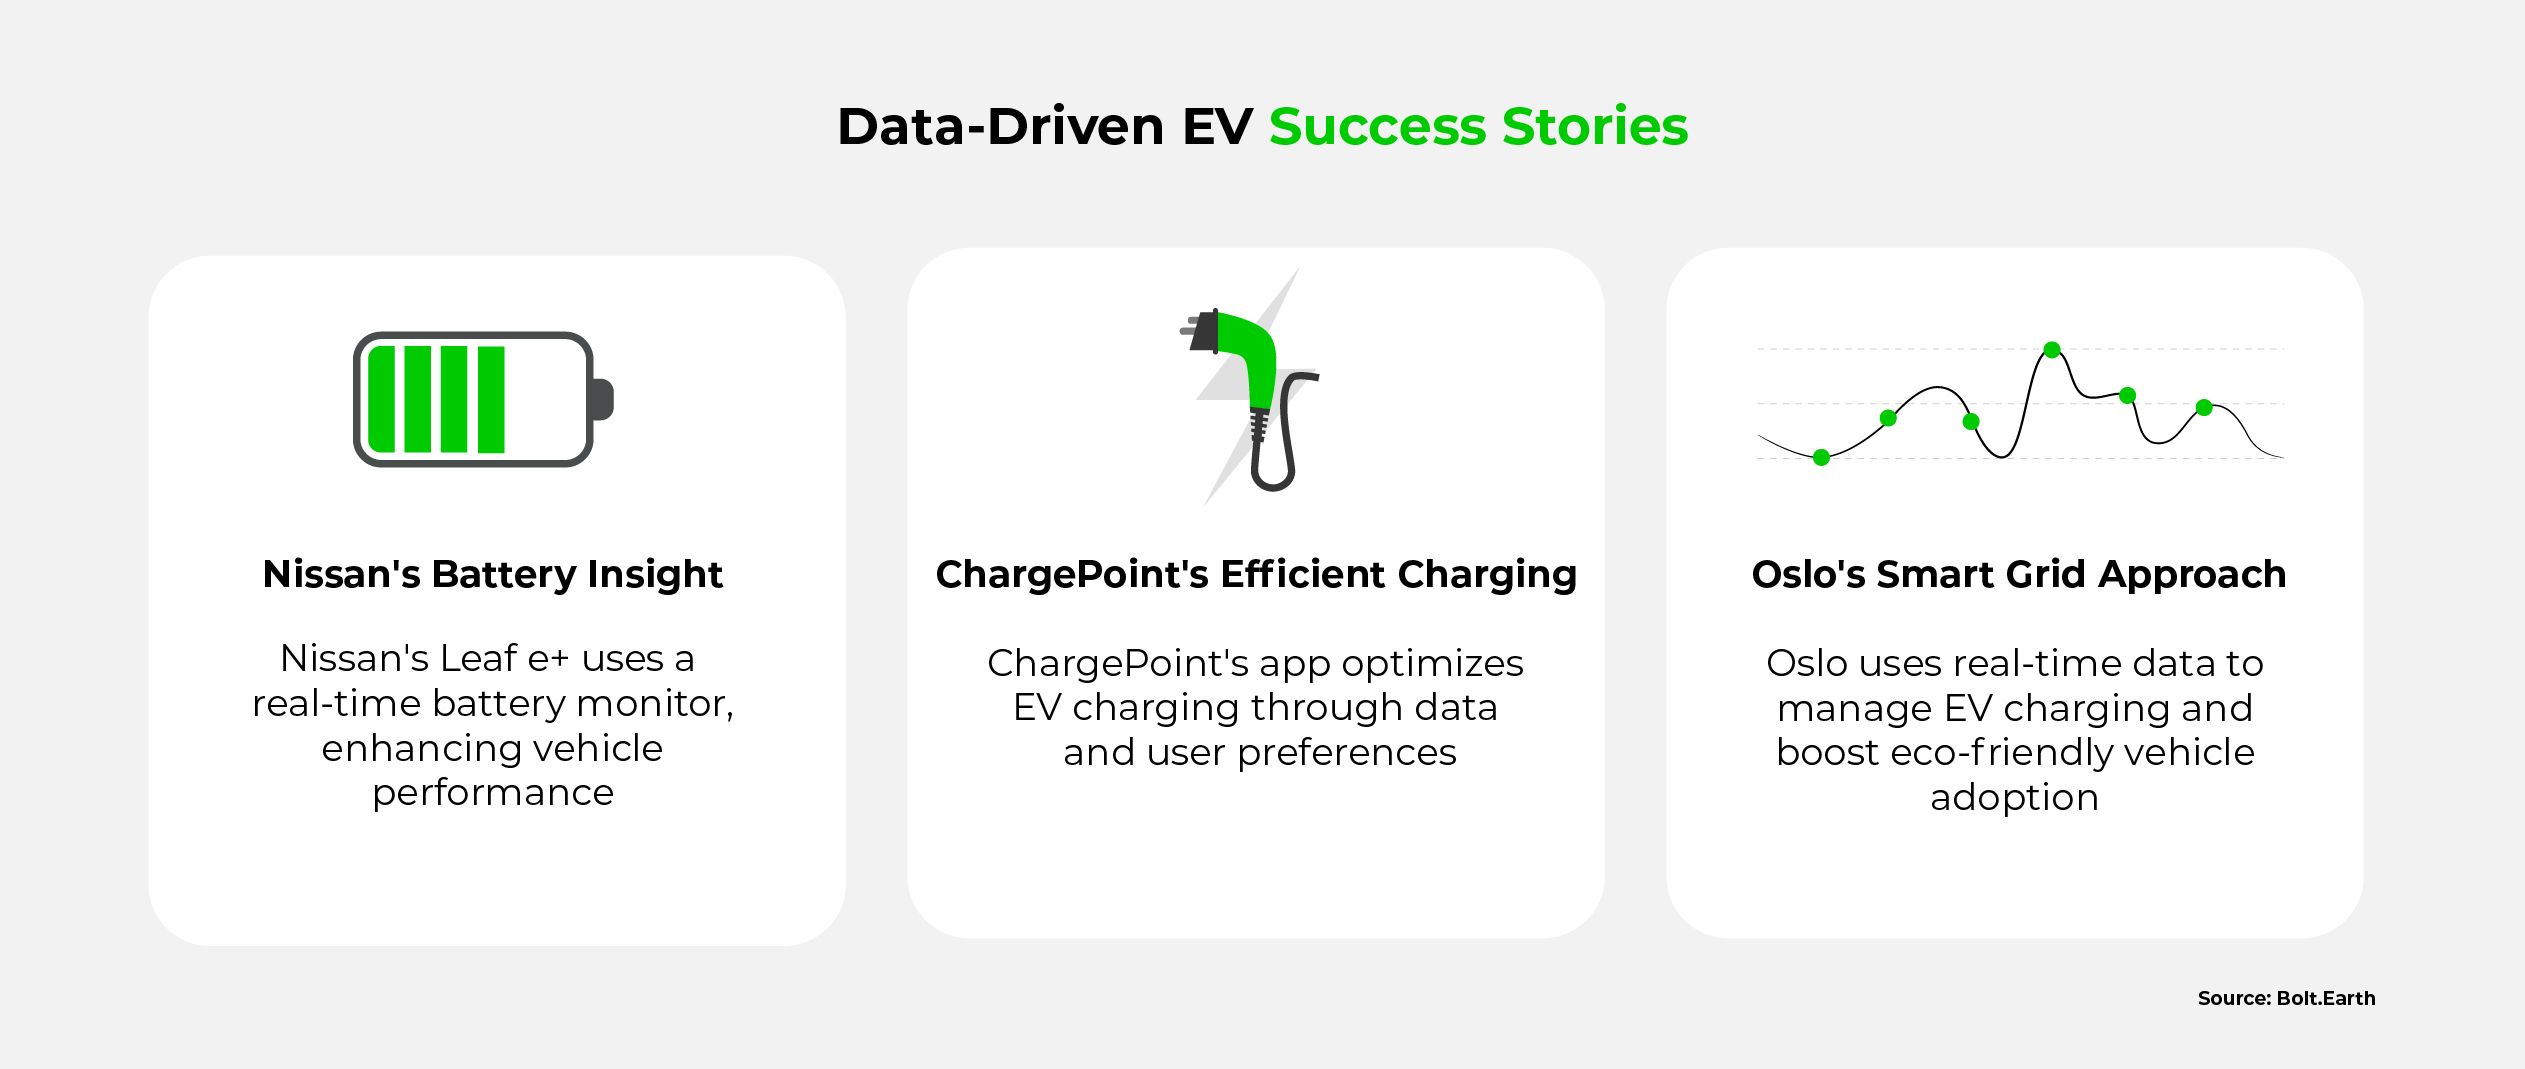 A pros and cons list for data-driven EV solutions